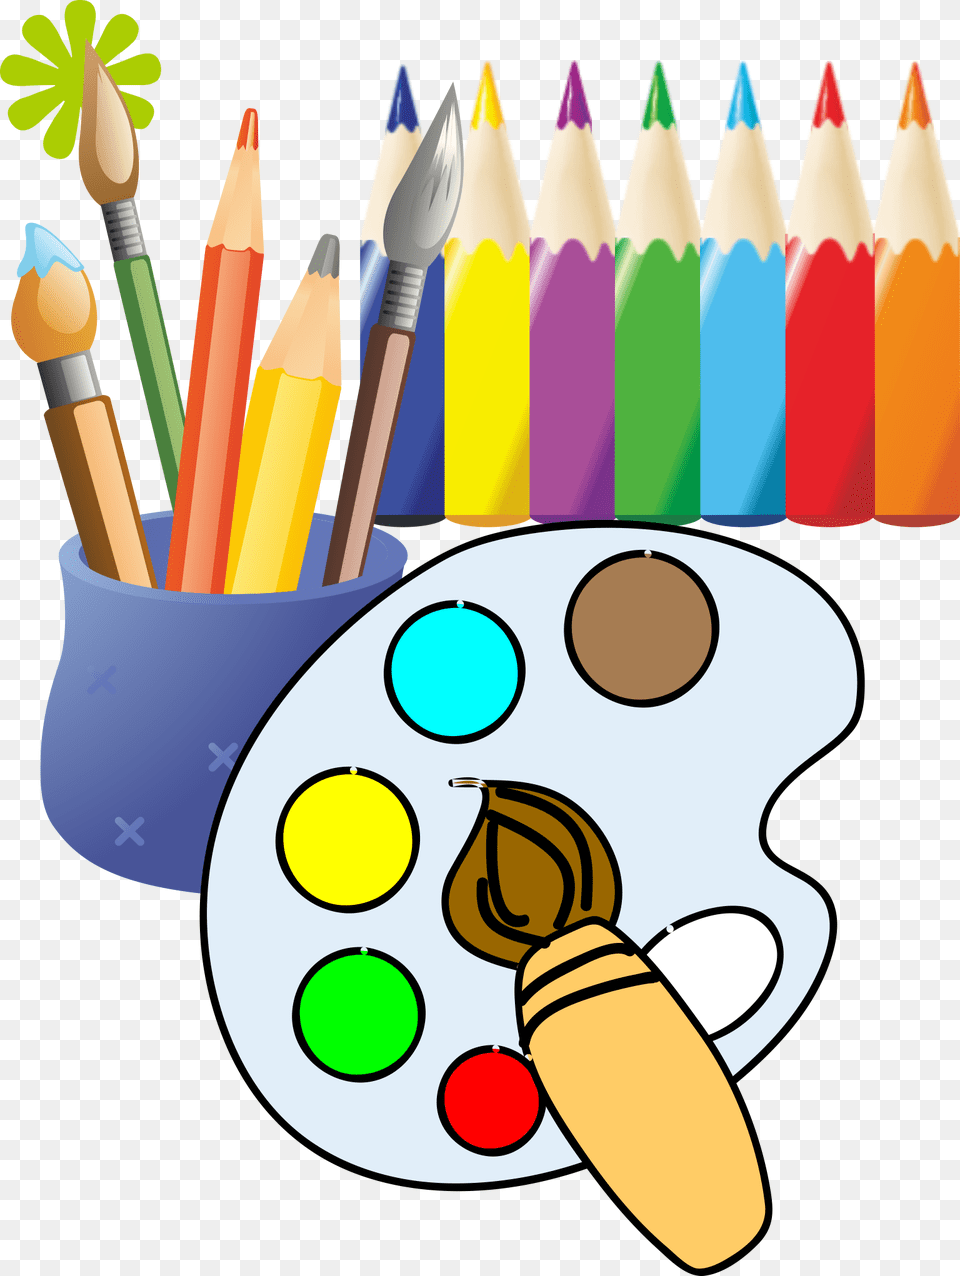 Paintbrush Painting Drawing Tools Illustration Painting And Drawing Clipart, Paint Container, Palette Png